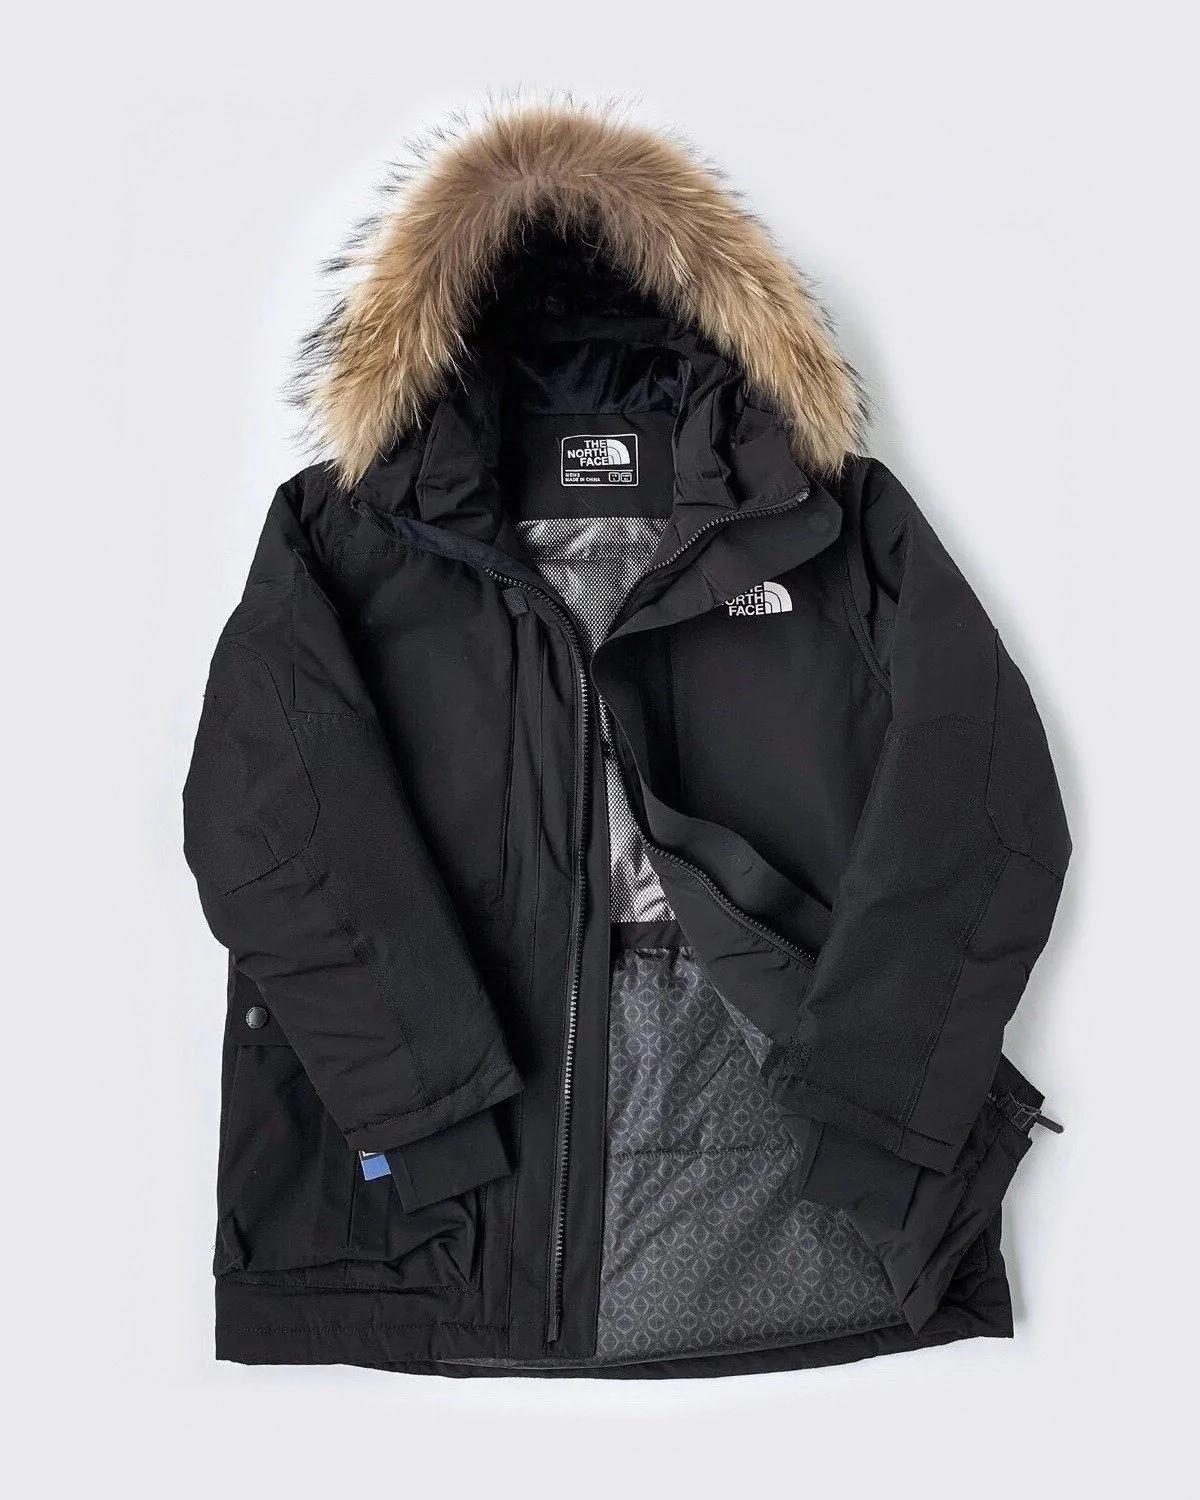 The North Face Men's New Outerboroughs Jacket